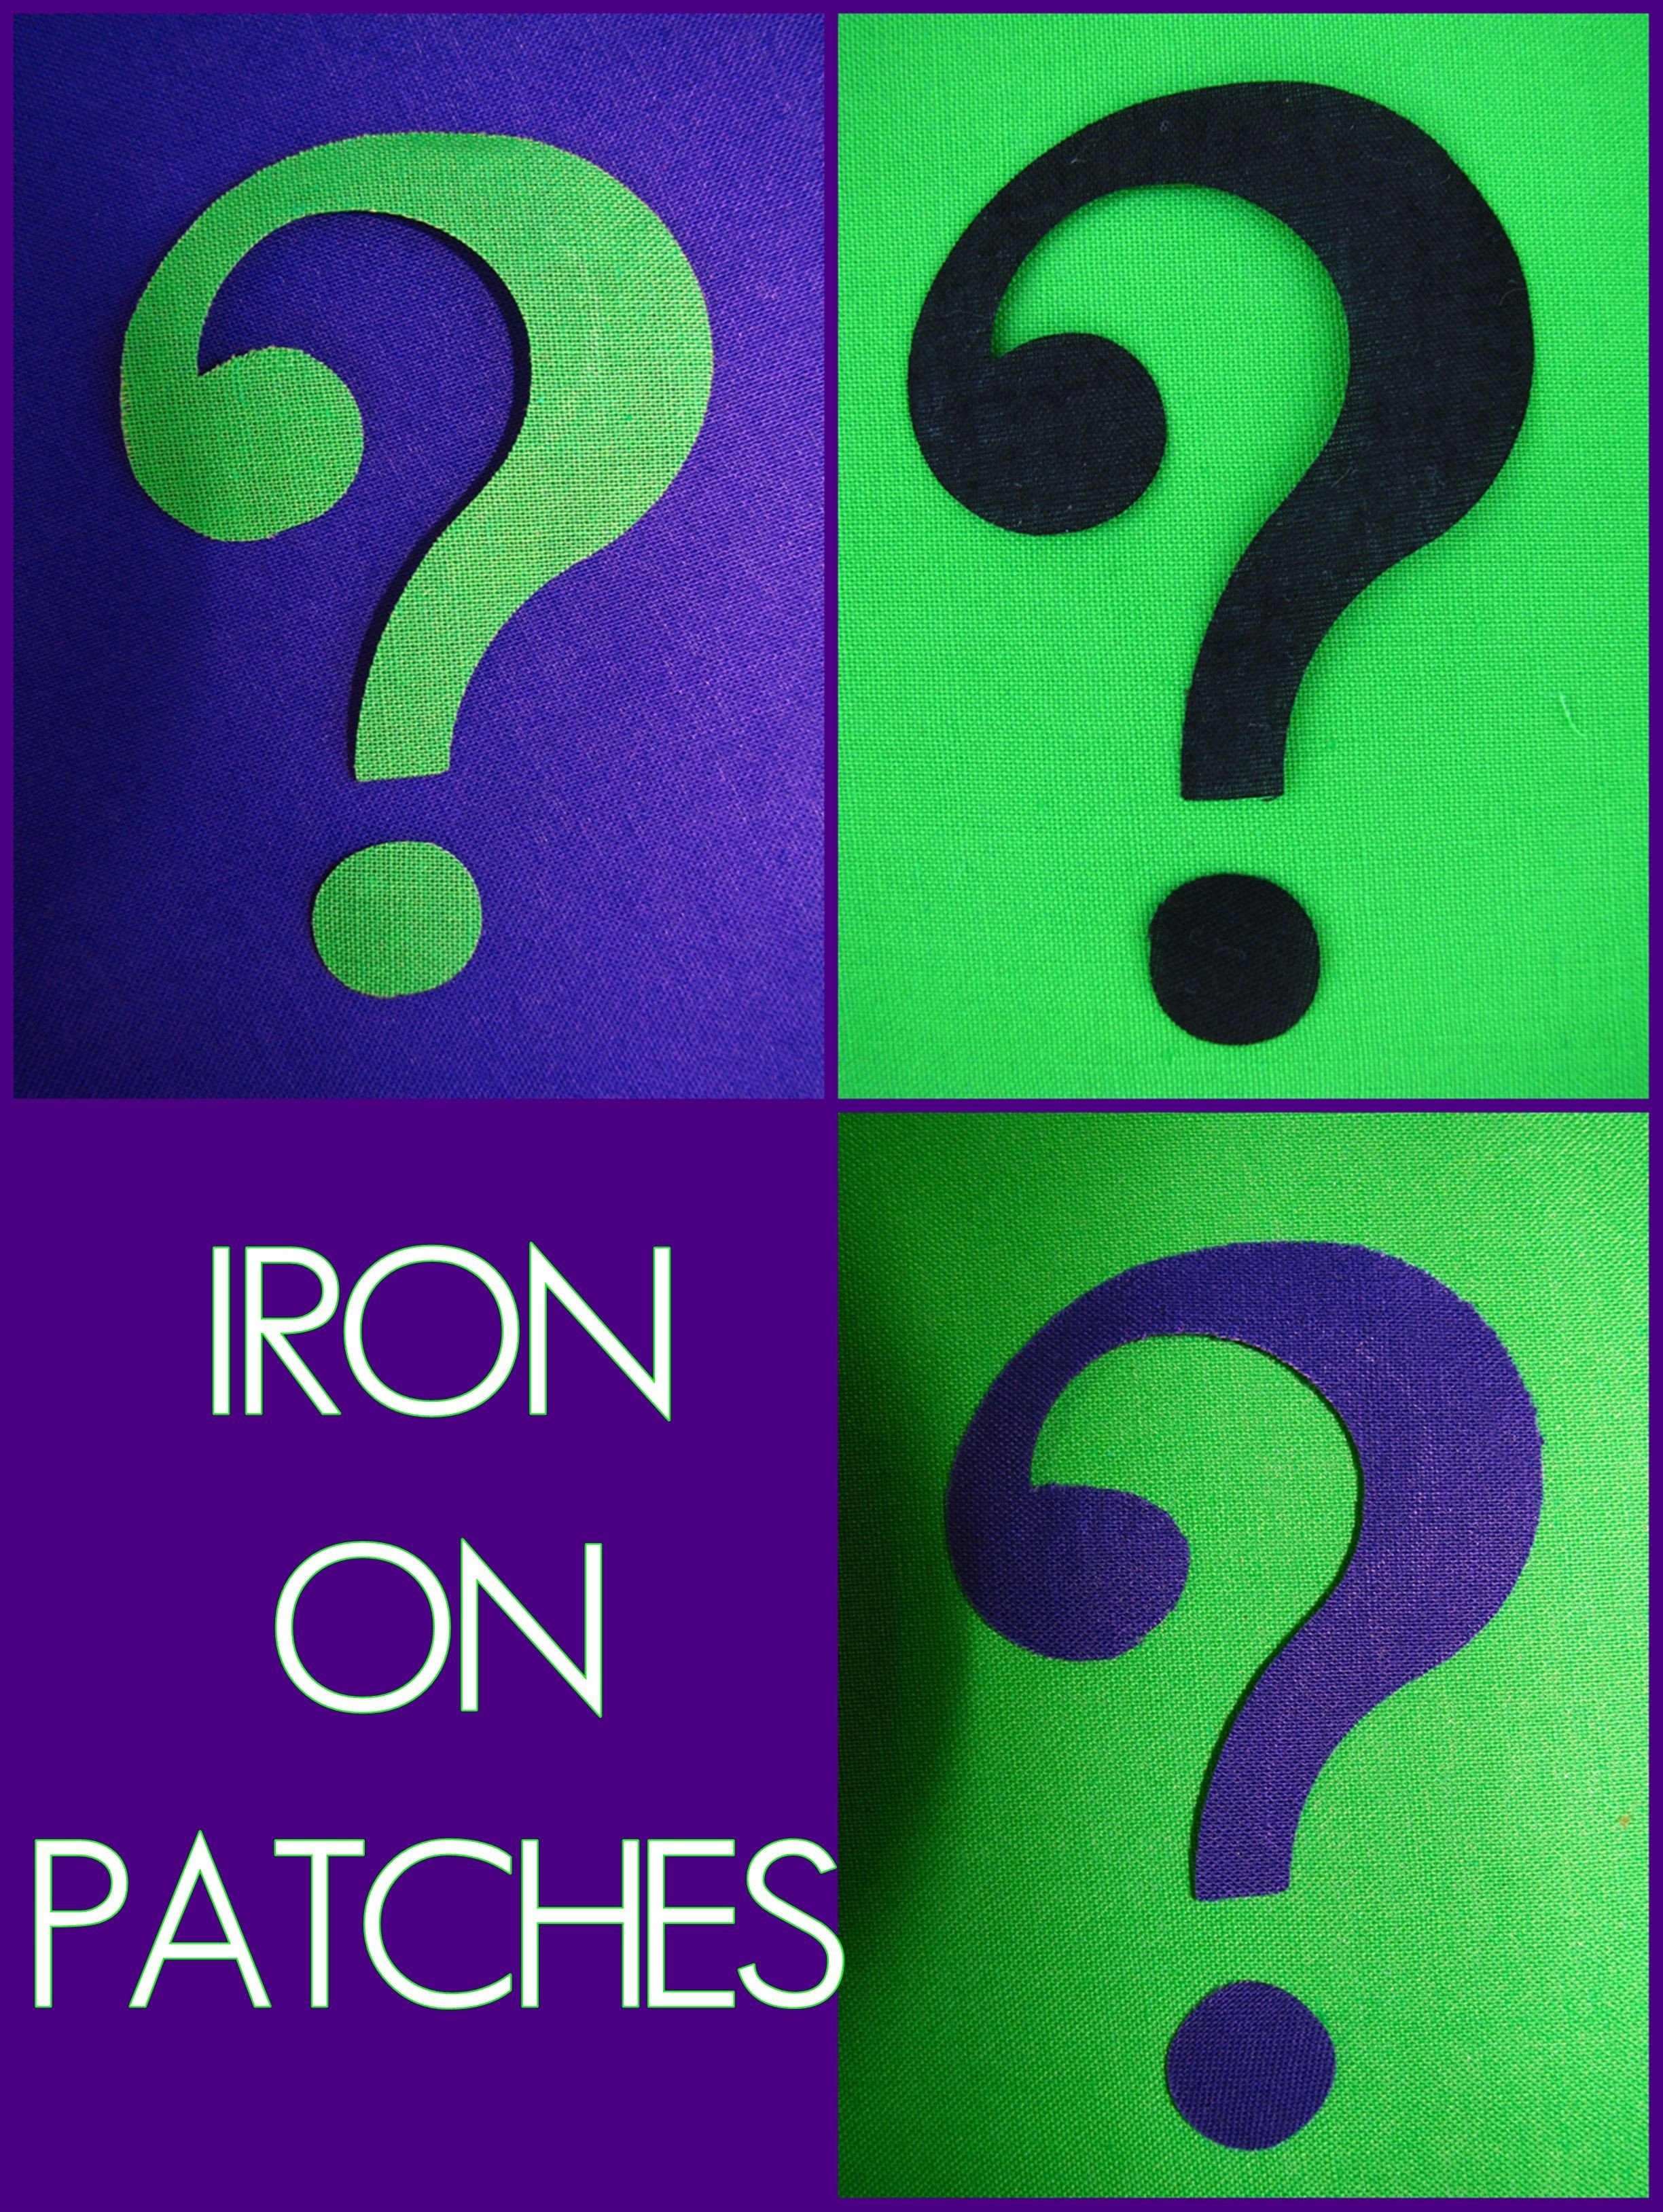 RIDDLER QUESTION MARK SYMBOL PATCHES Patch Iron ons Purple